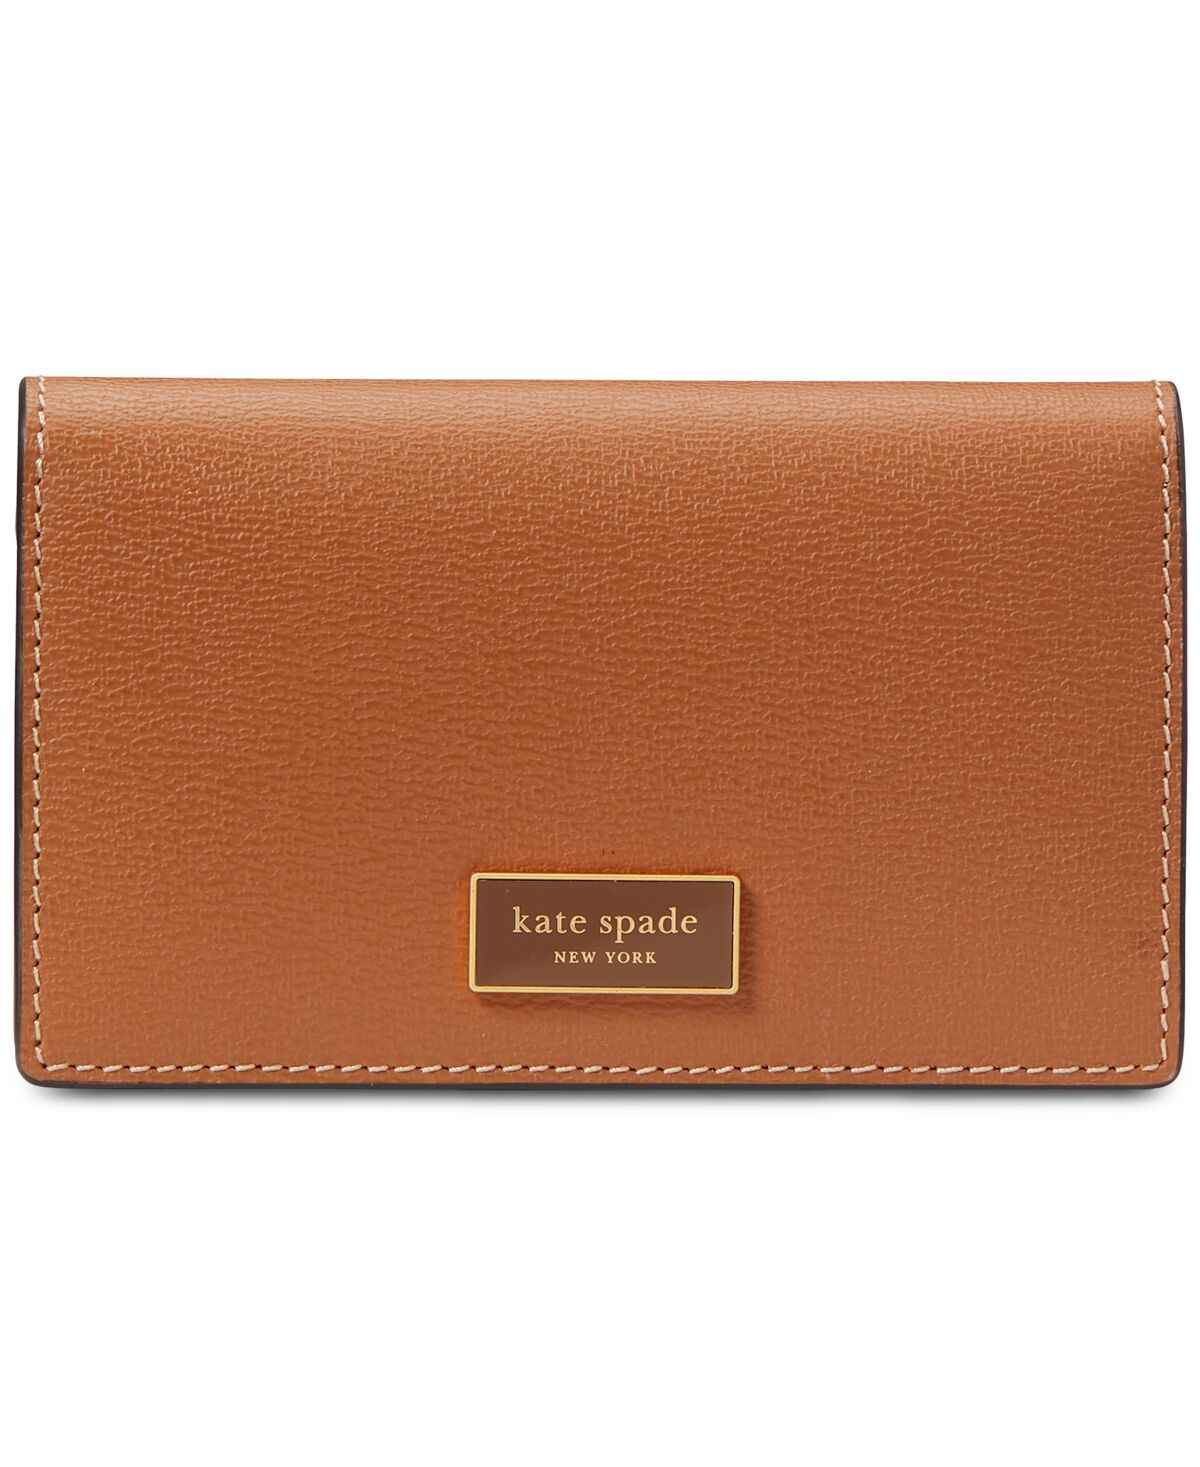 kate spade new york Katy Textured Leather Small Bifold Snap Wallet - Allspice Cake